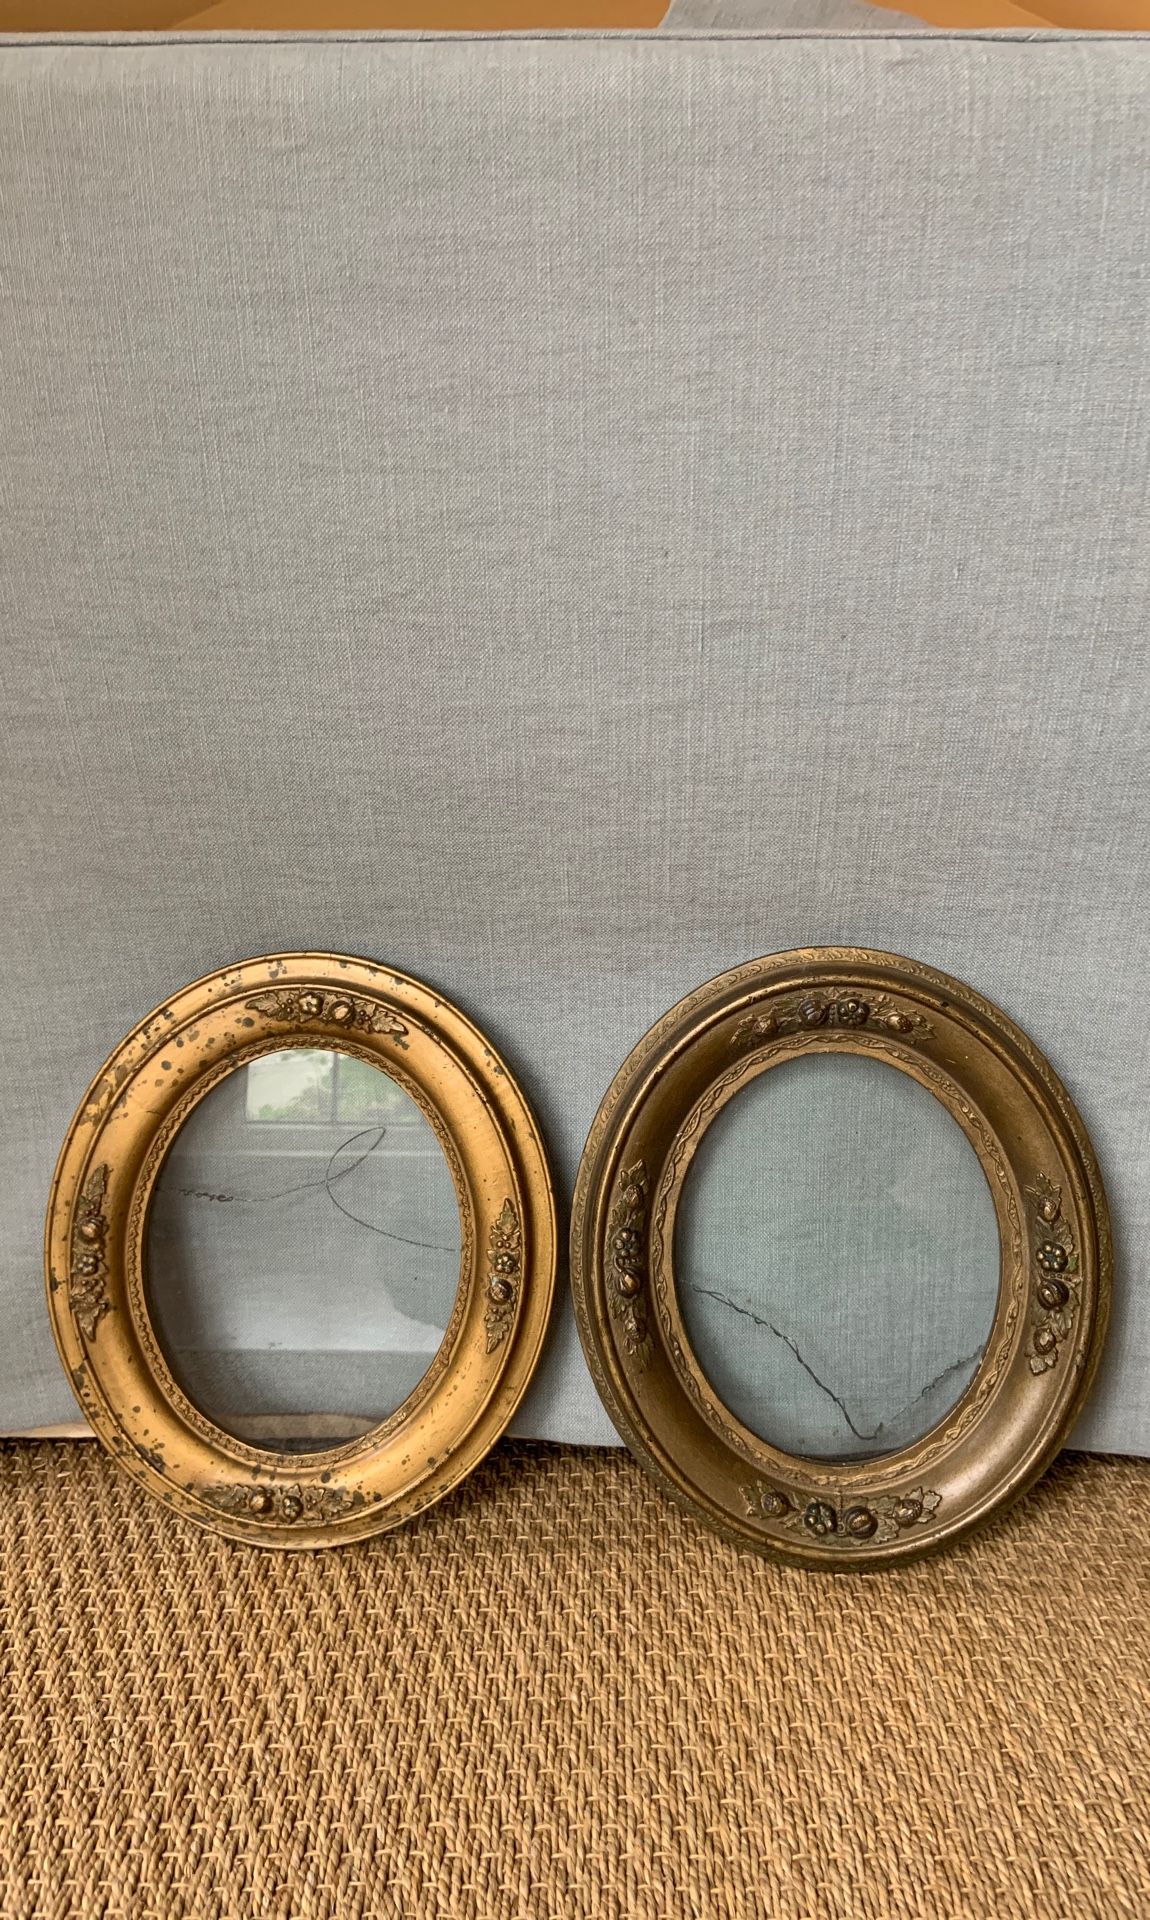 Antique oval frames with glass